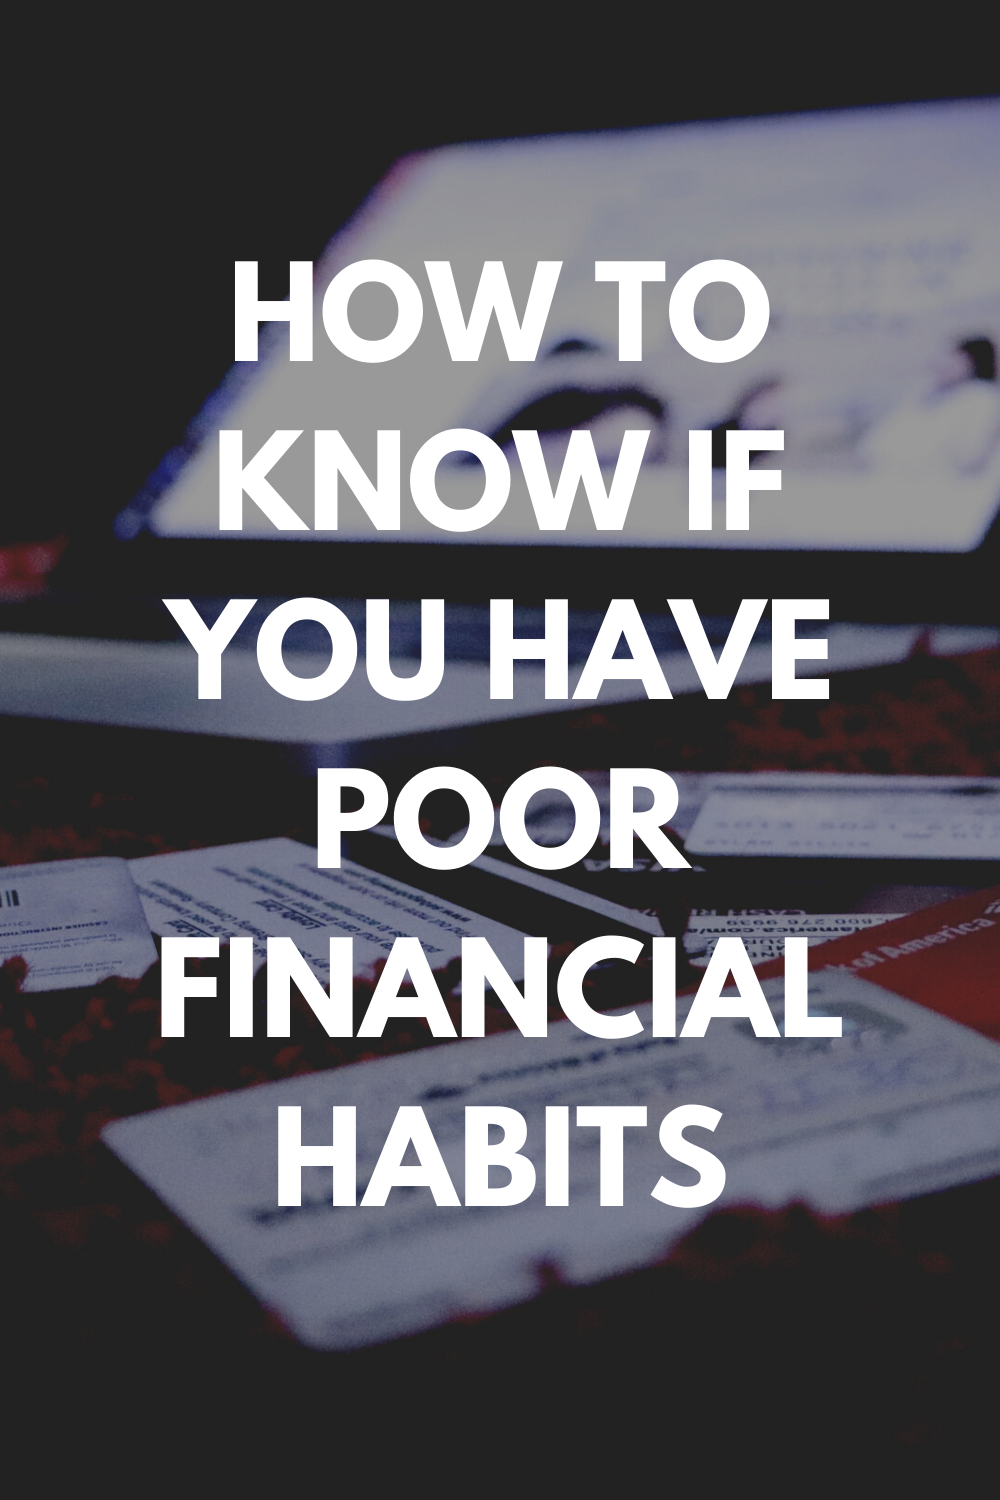 How to Know If You Have Poor Financial Habits